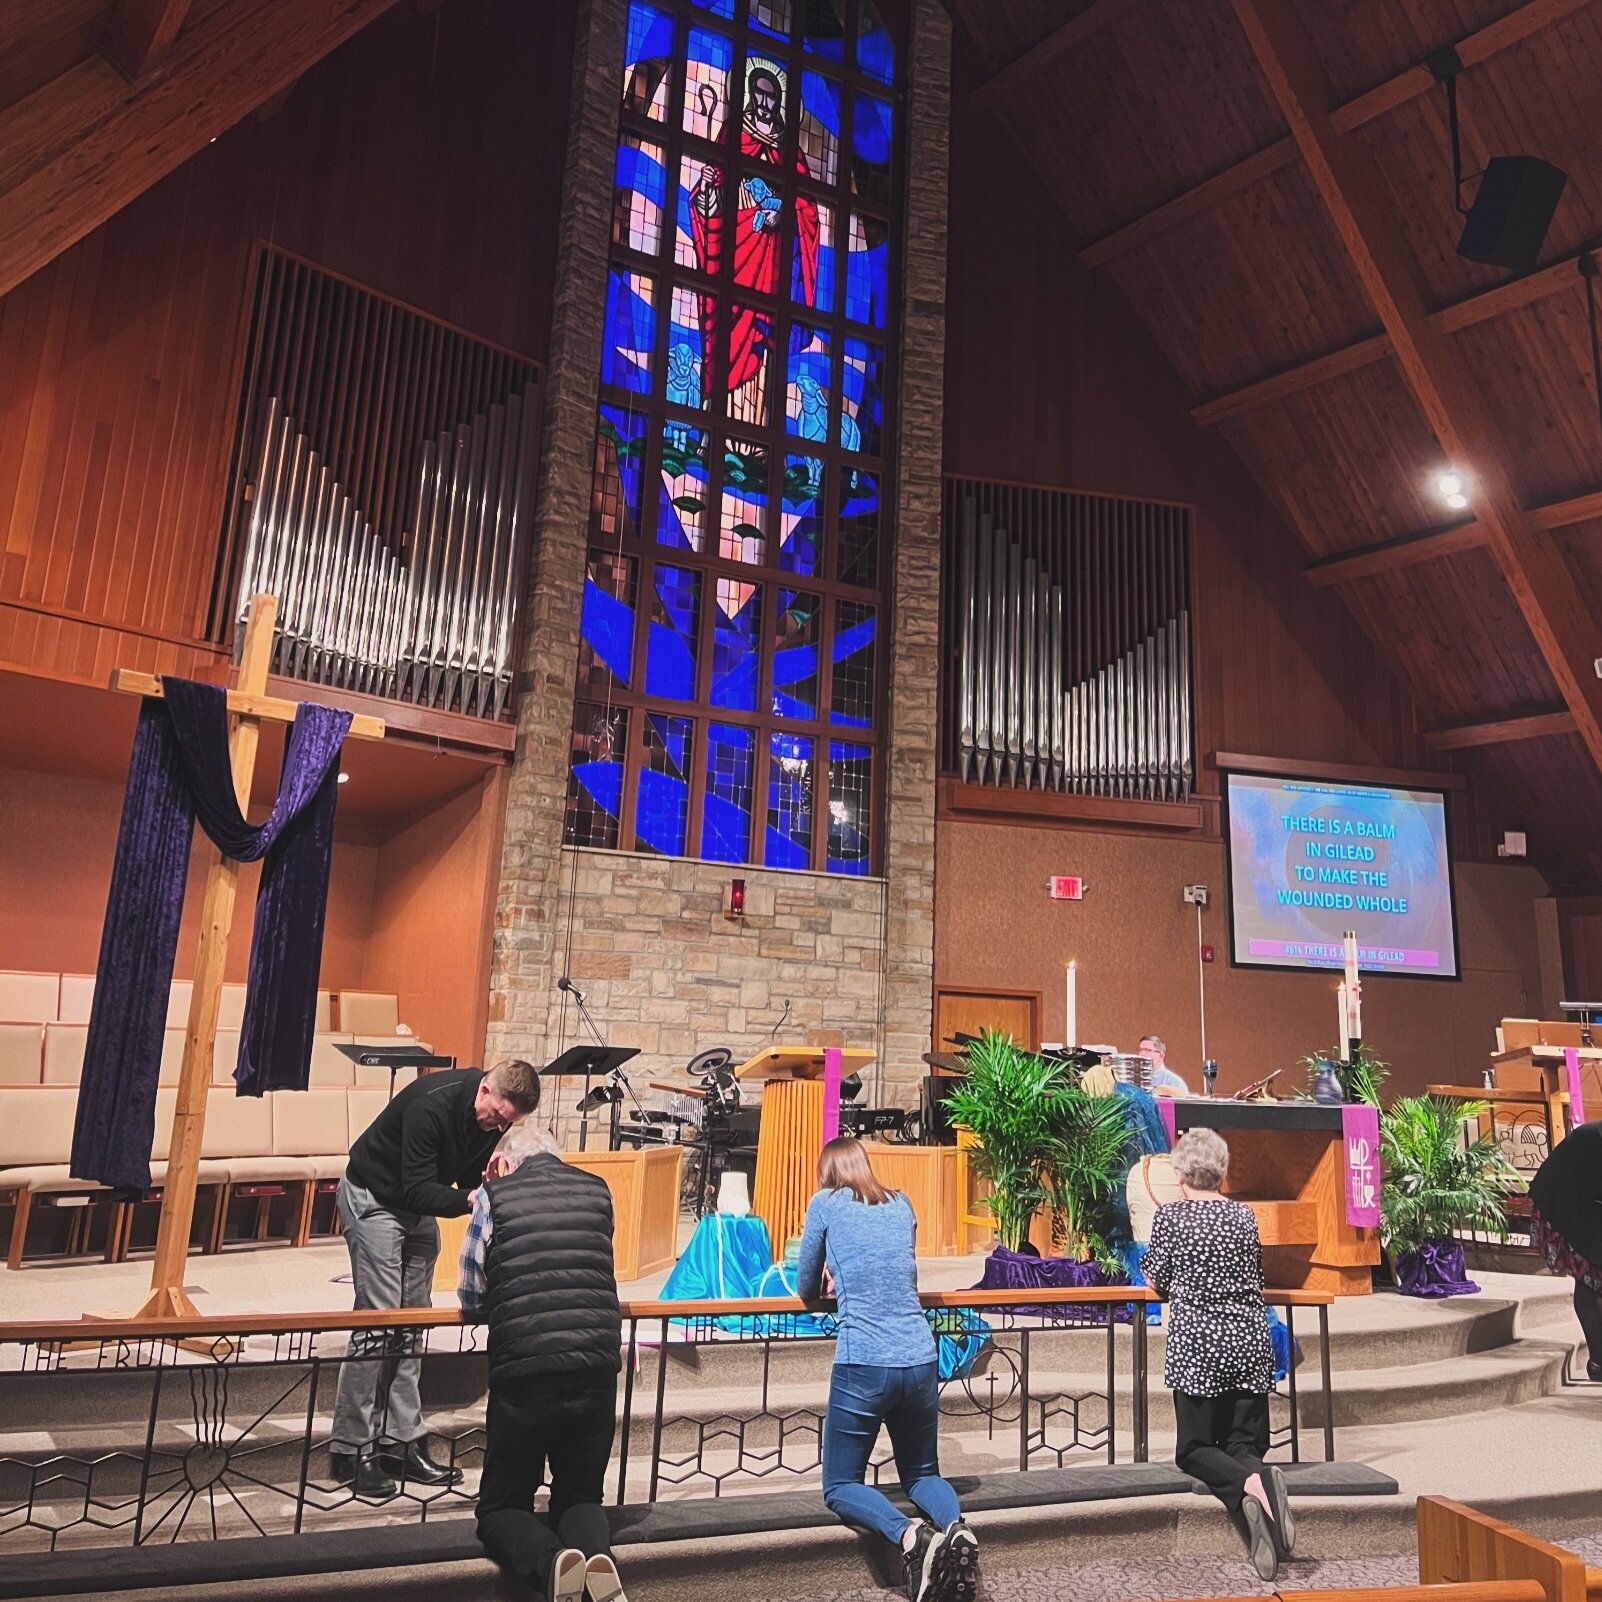 Holy Week worship continues tonight at 6:15pm, and continues with Maundy Thursday worship and Good Friday worship at 12:15pm and 6:15pm both days. Join us for the Faith Story Dinner Theater on Holy Saturday at 5:30pm (RSVP required at 1stlu.org/next 